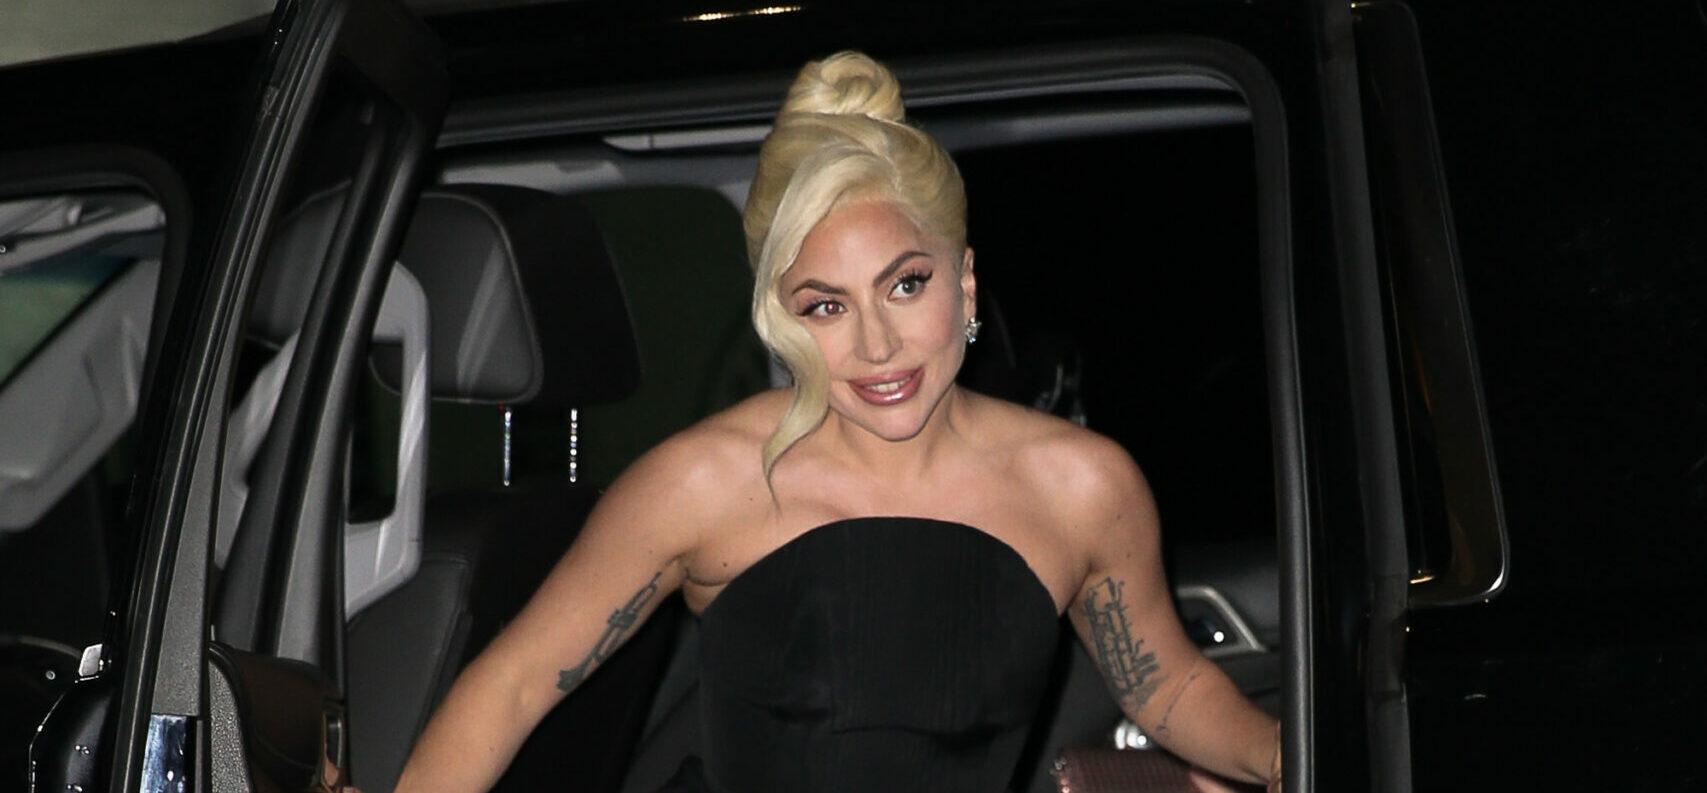 Lady Gaga’s Worst Nightmare Come True; Dognapper Mistakenly Freed!